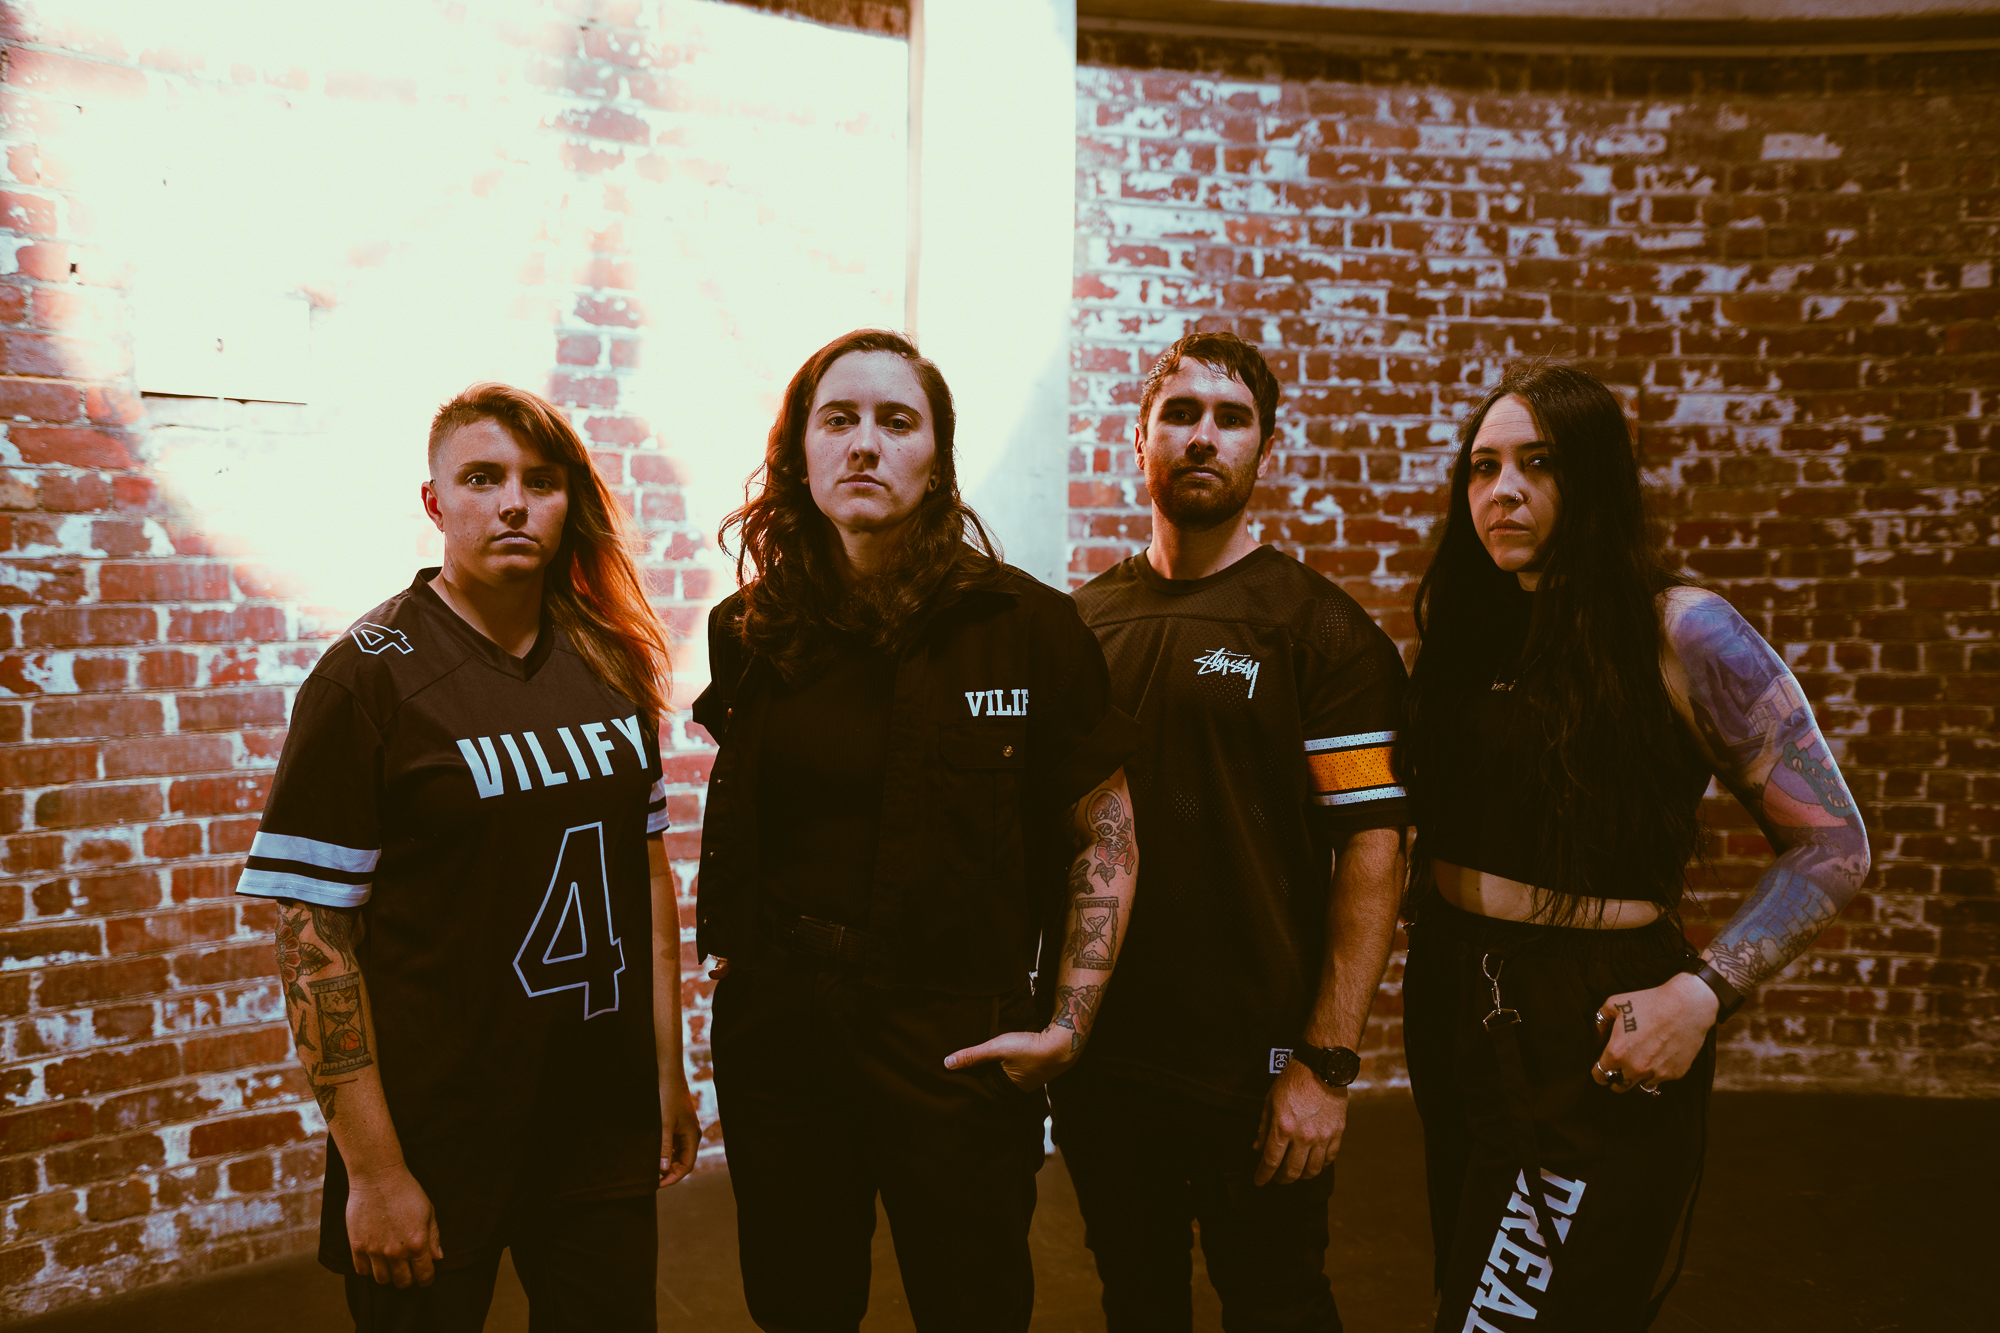 VILIFY CALL OUT USERS ON GROOVING NEW SINGLE “SPLIT TONGUE”